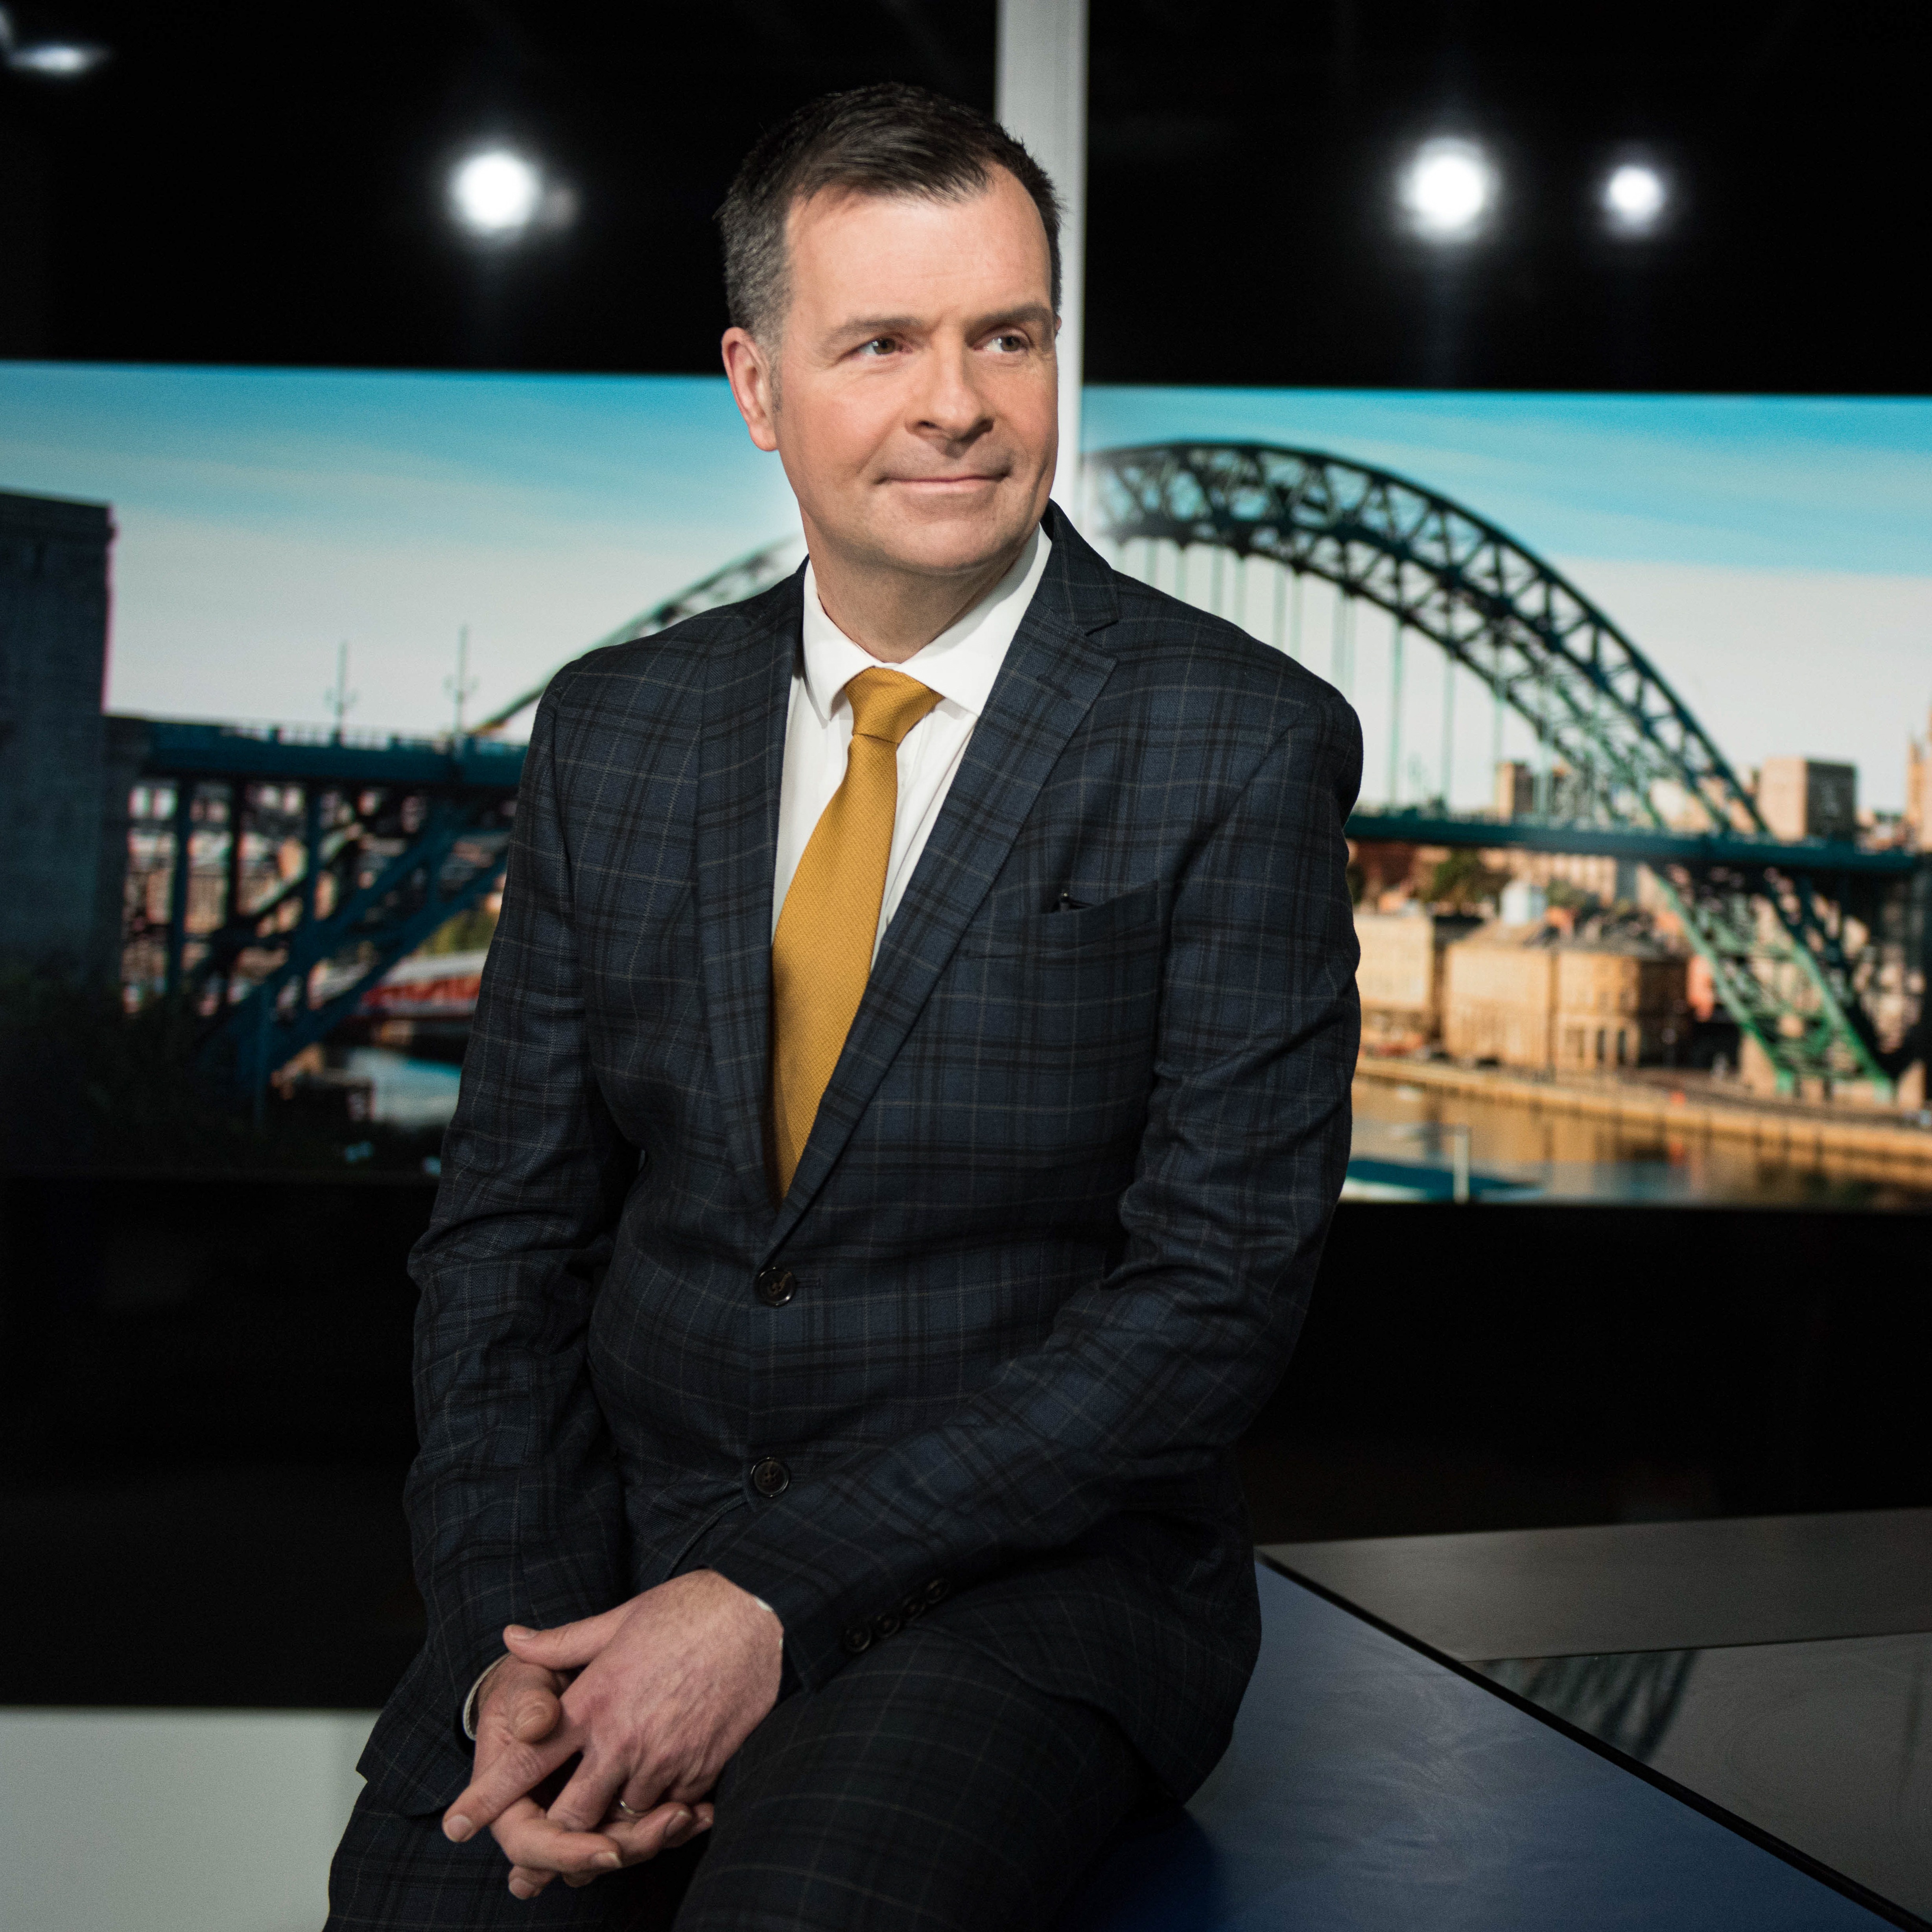 Find out about ITV News' Simon O'Rourke